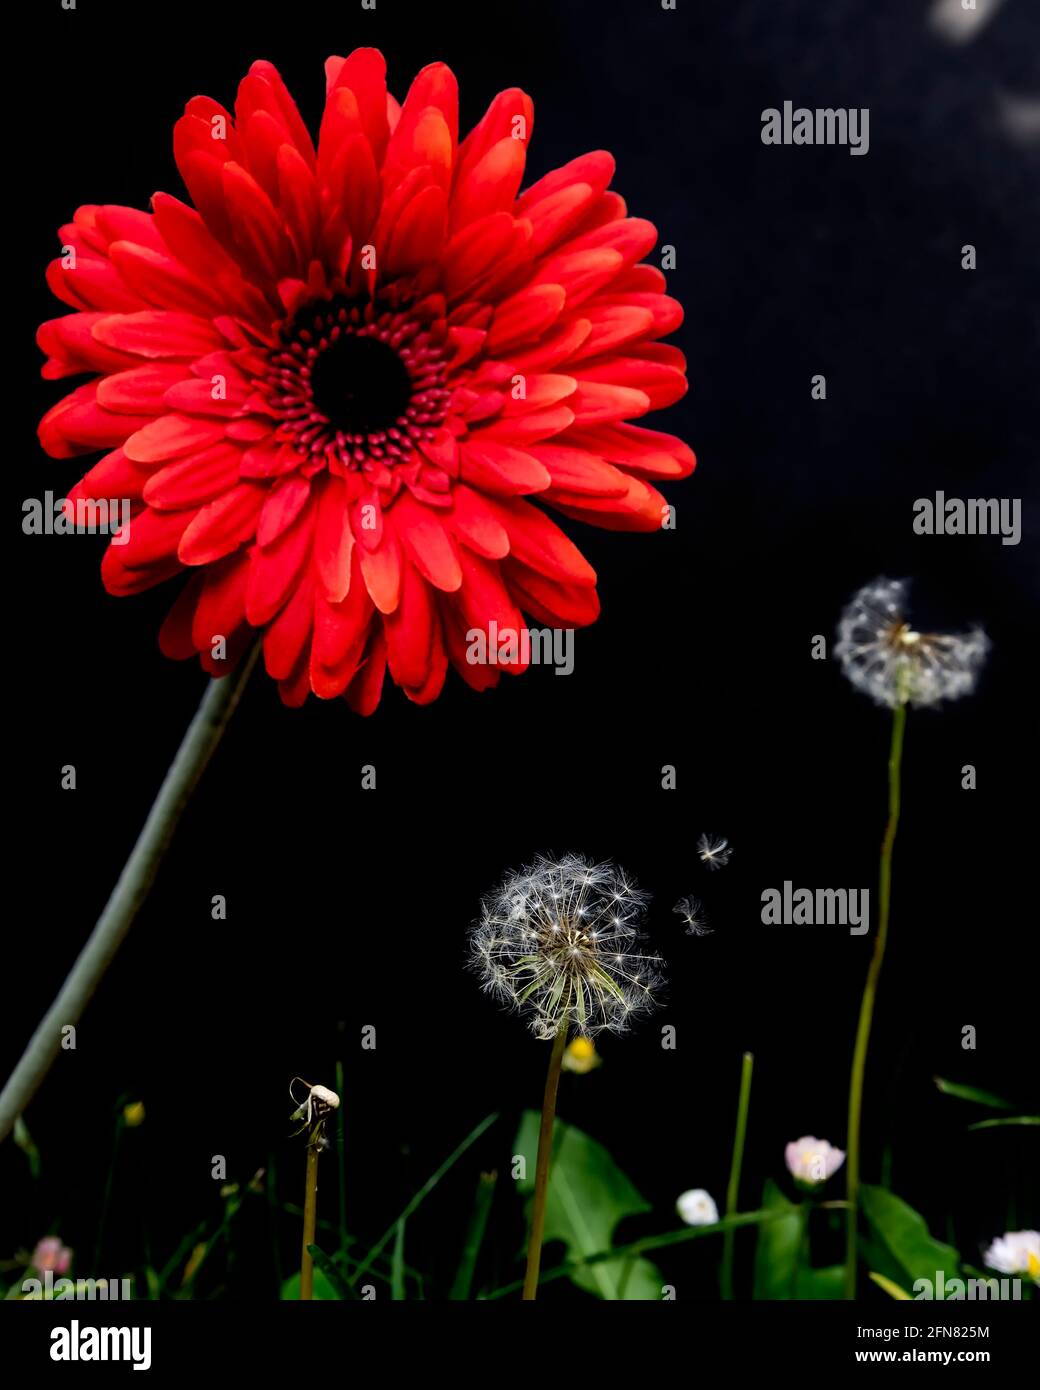 A large red gerbera above two dandelion flowers from which some spores fly away on a dark background Stock Photo